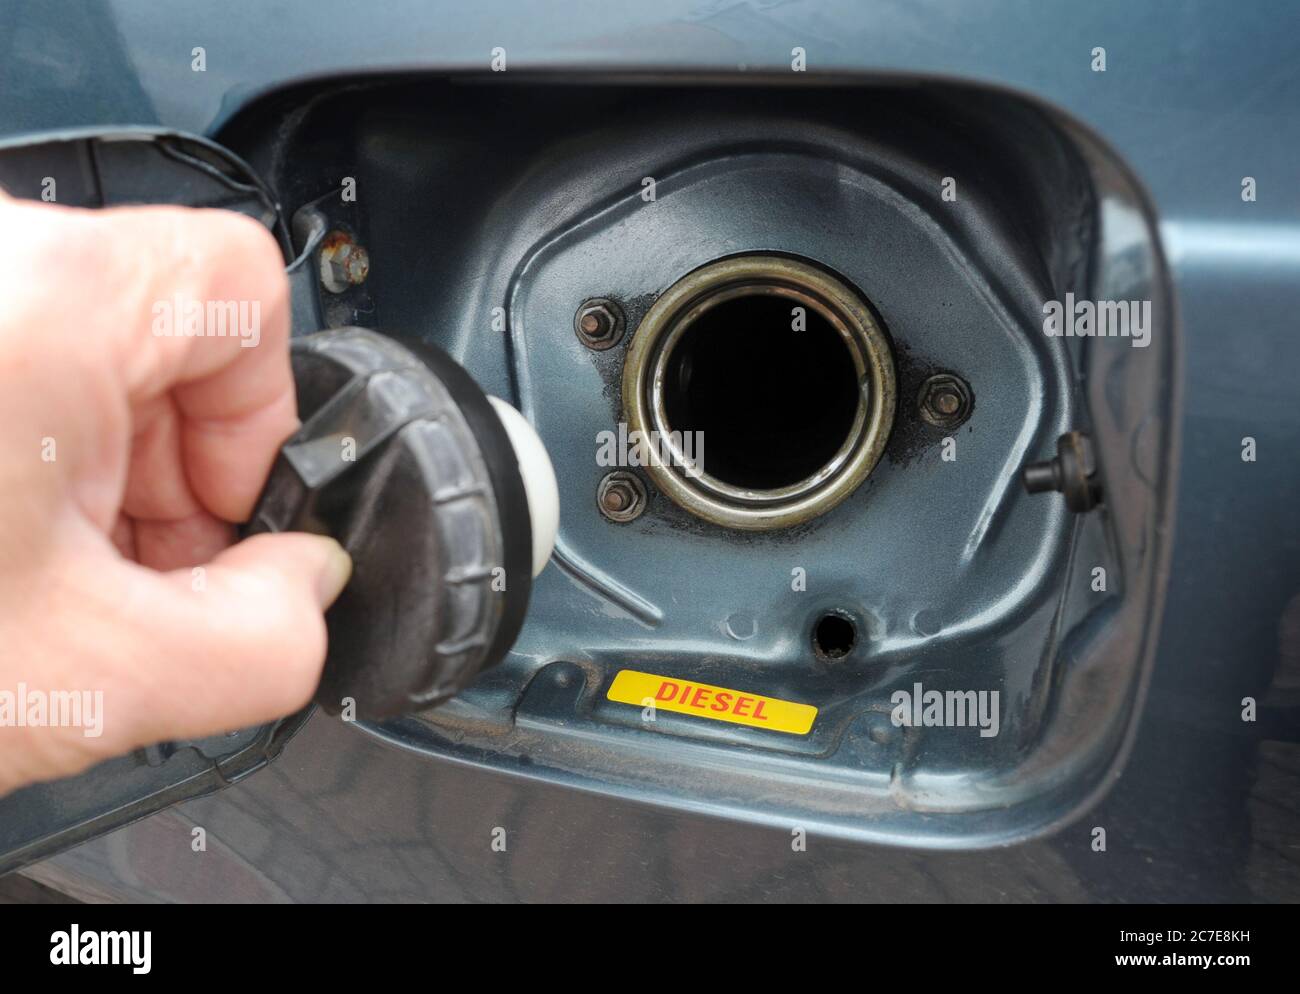 FUEL CAP BEING REMOVED FROM OLDER CAR DIESEL FUEL TANK RE EMISSIONS ELECTRIC CARS DIRTY ENGINES THE ENVIRONMENT OLD CARS ETC UK Stock Photo